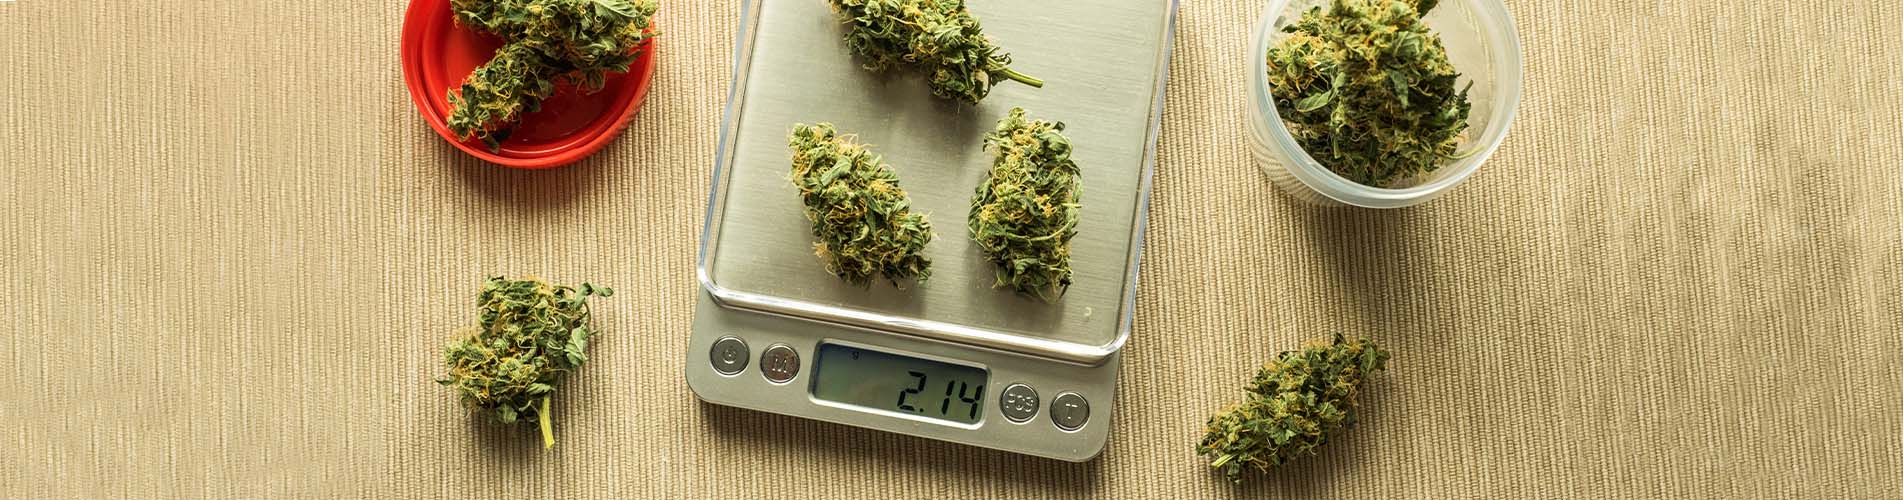 A Visual Guide to Weed Measurements and Prices